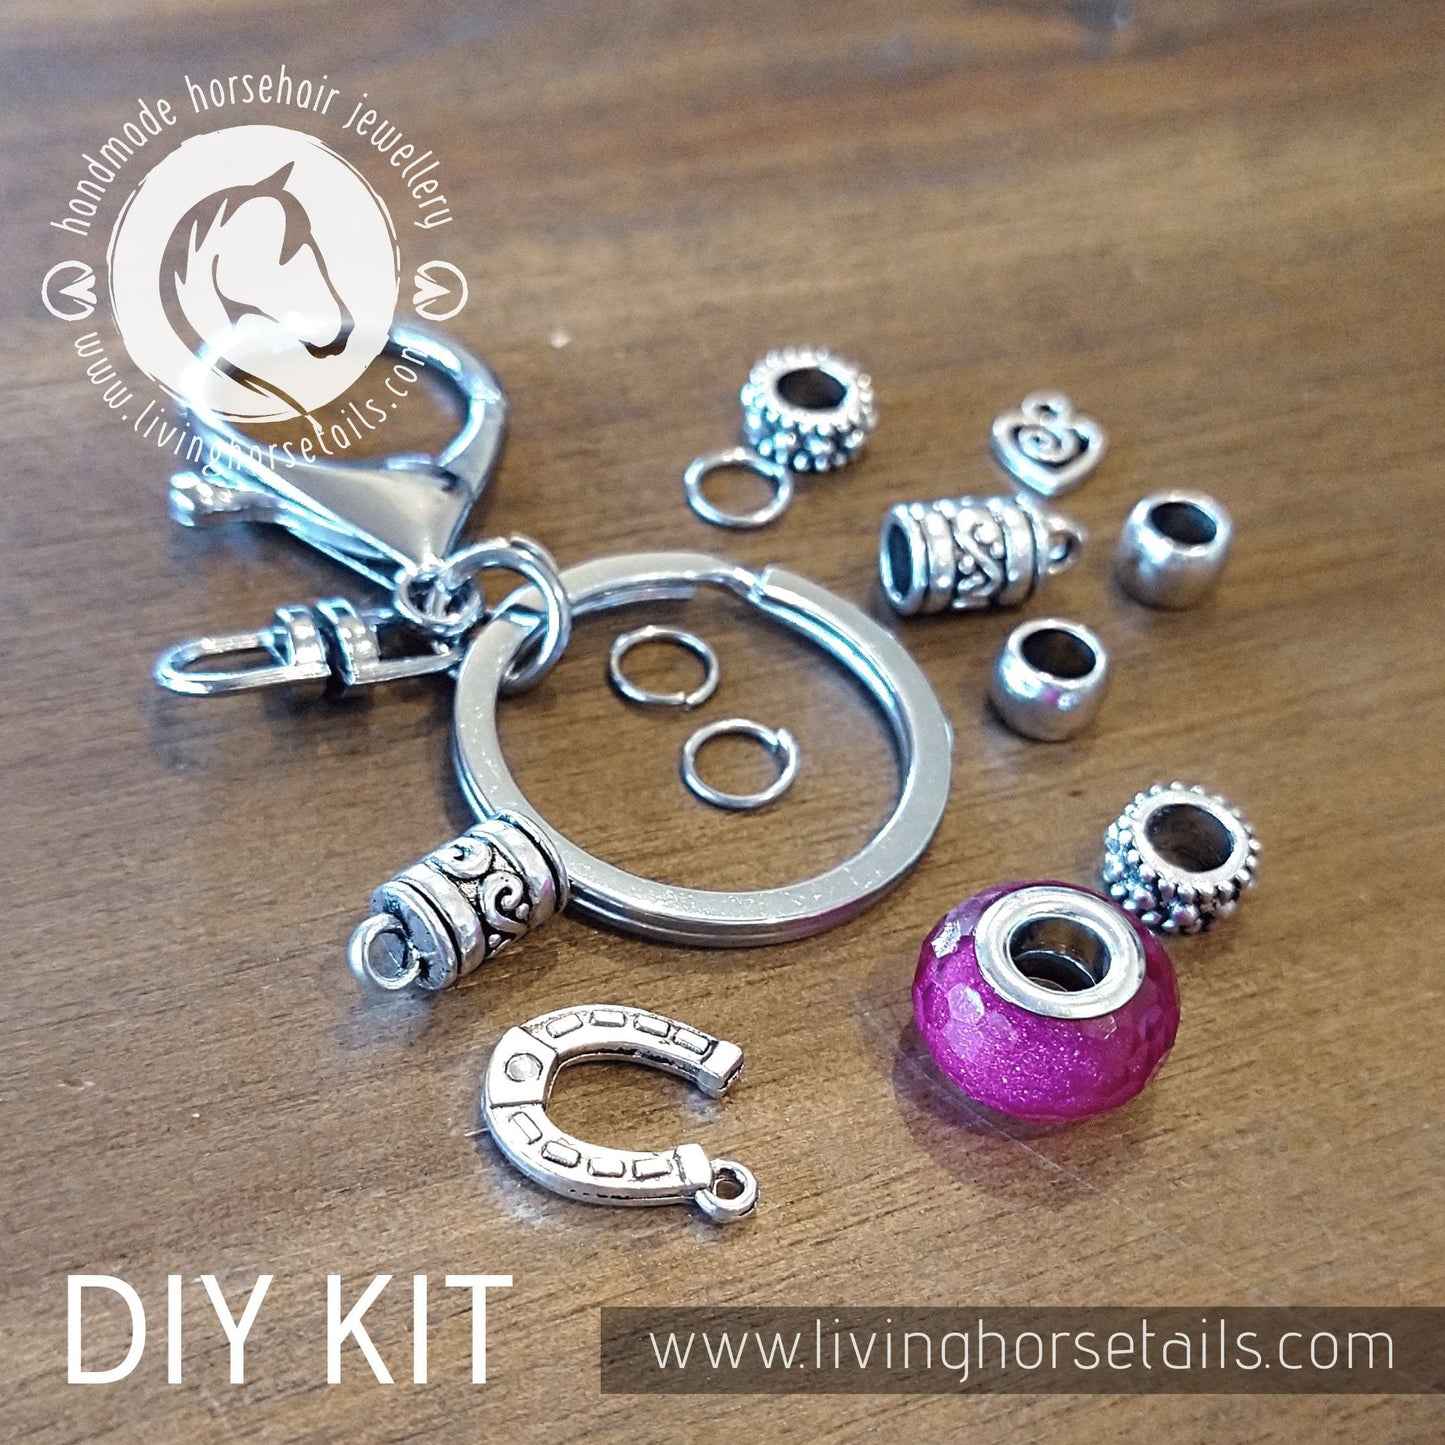 DIY KIT Keyring with acrylic glitter bead. Make your own with Horse tail hair.-Living Horse Tales Jewellery By Monika-The Equestrian